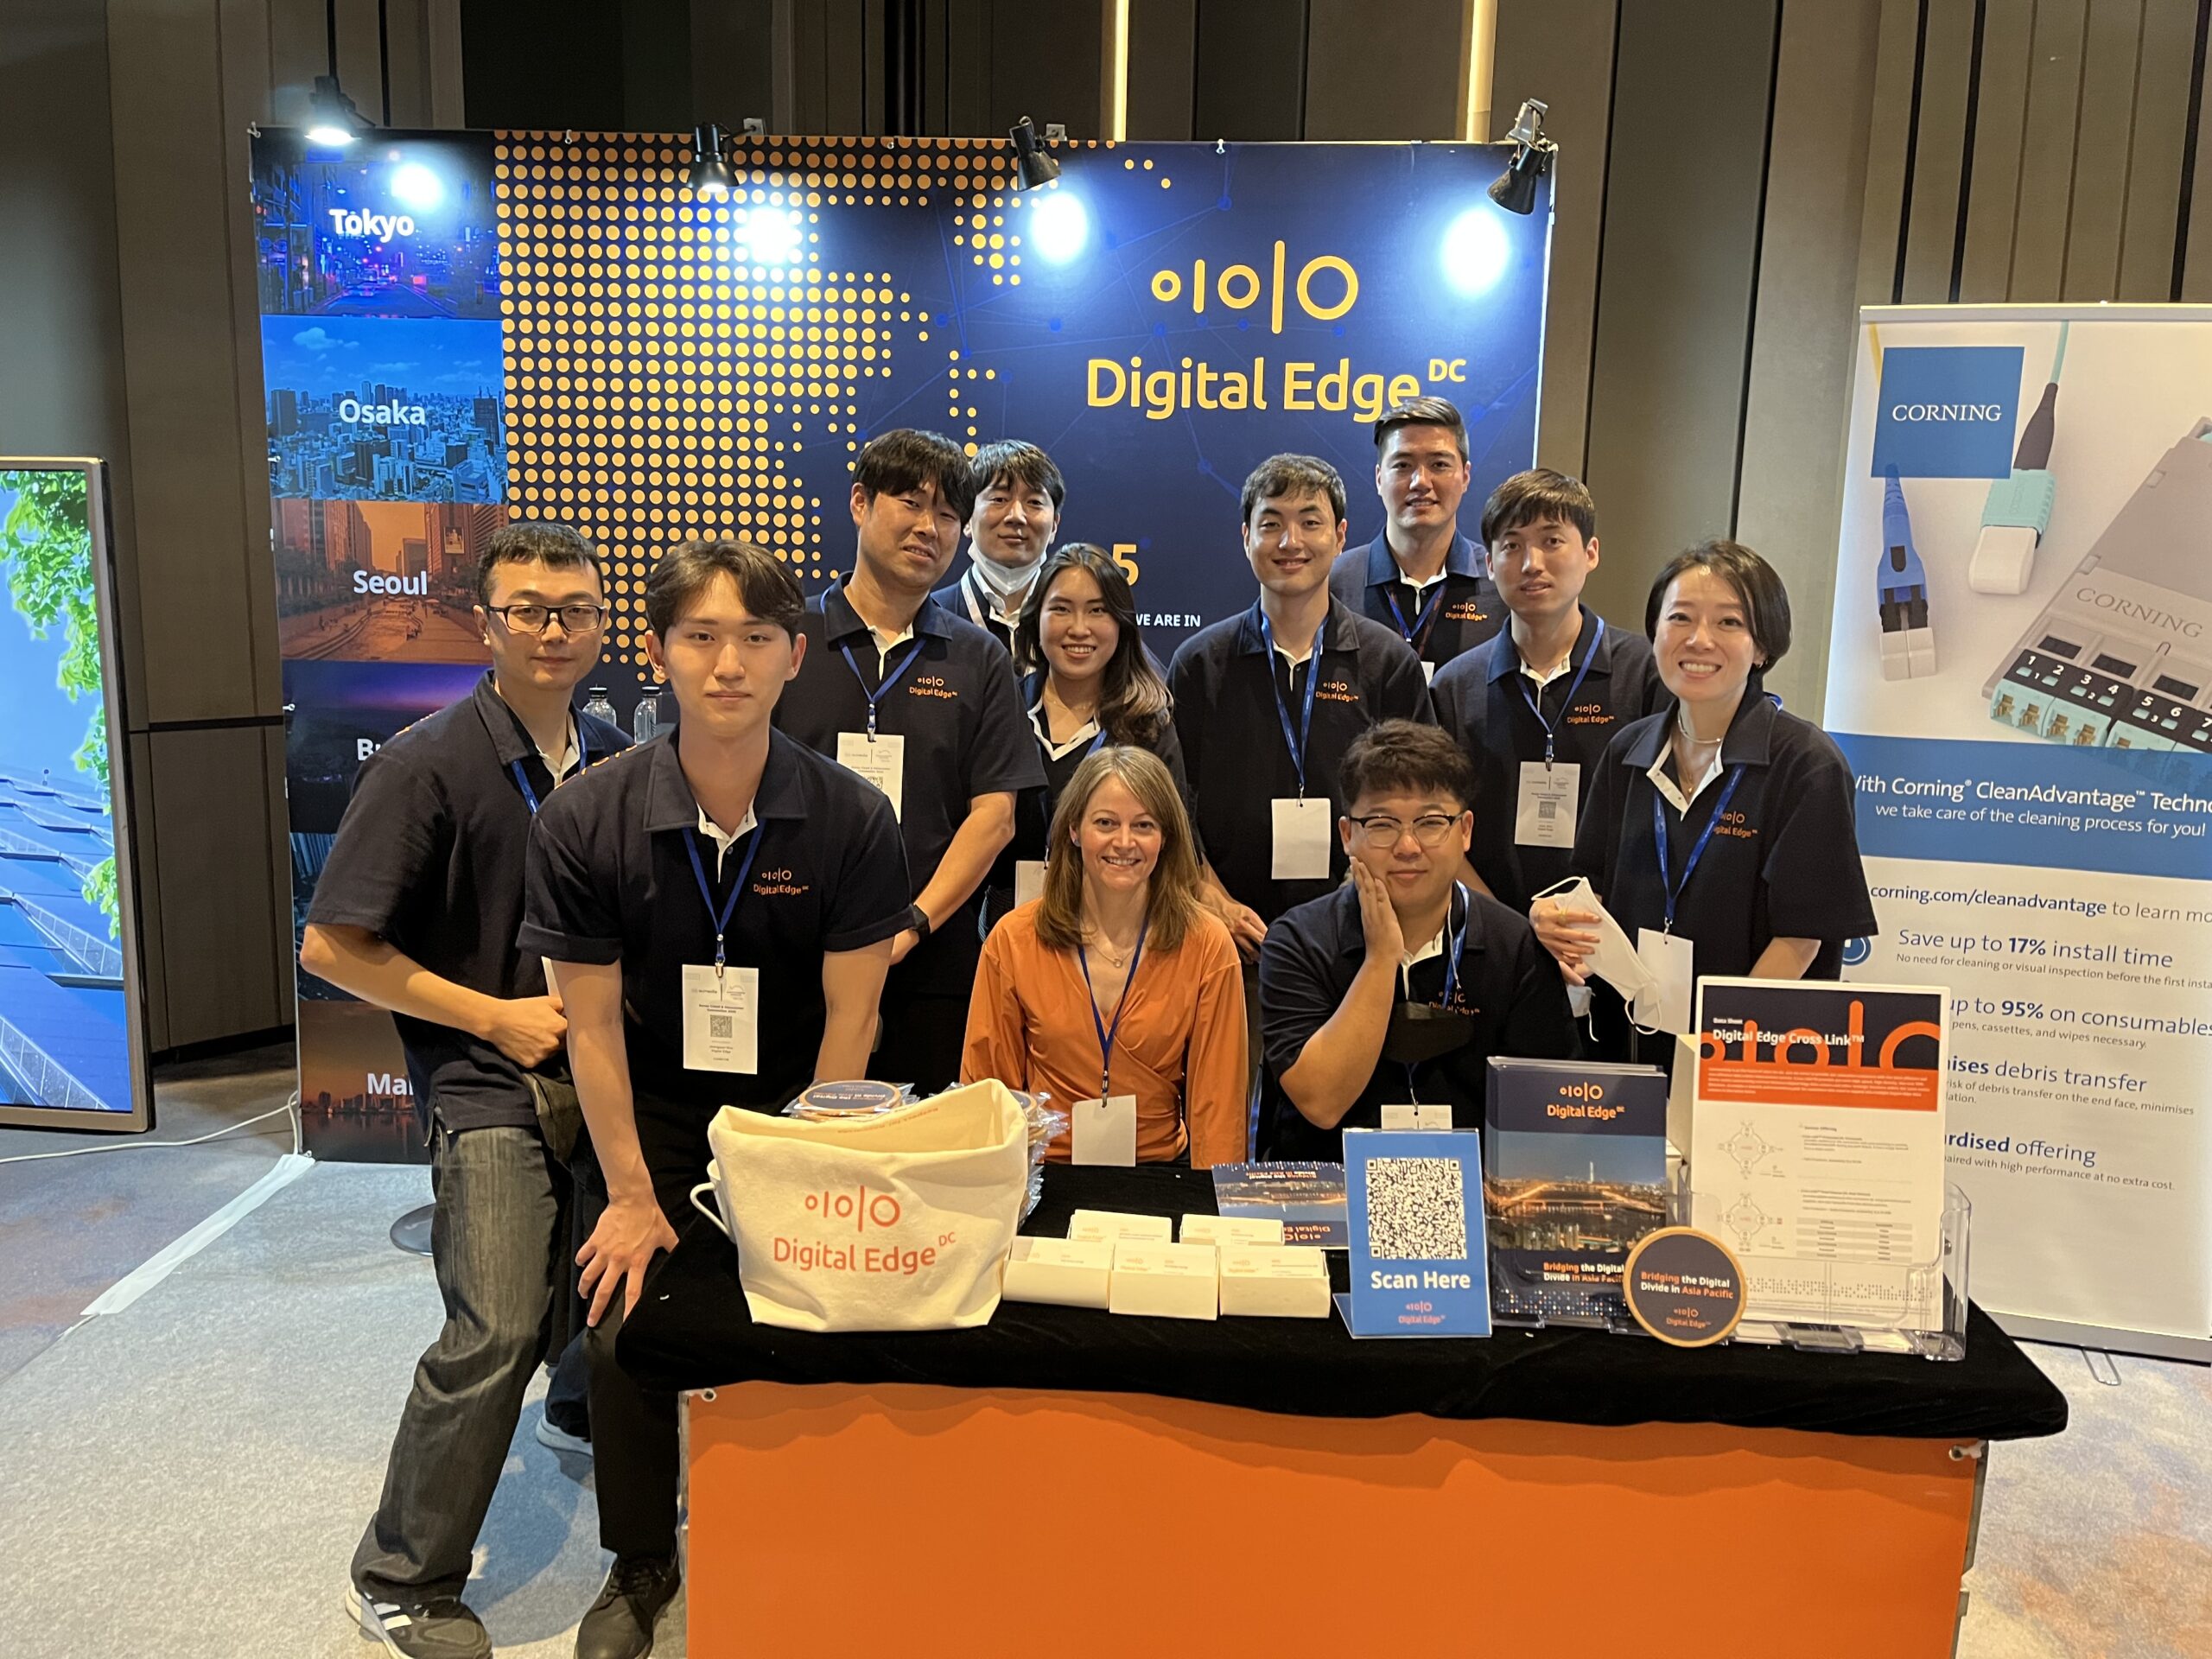 The Digital Edge team connected with customers, vendors and partners during the event at our booth, including showcasing their new 120MW SEL2 data center project